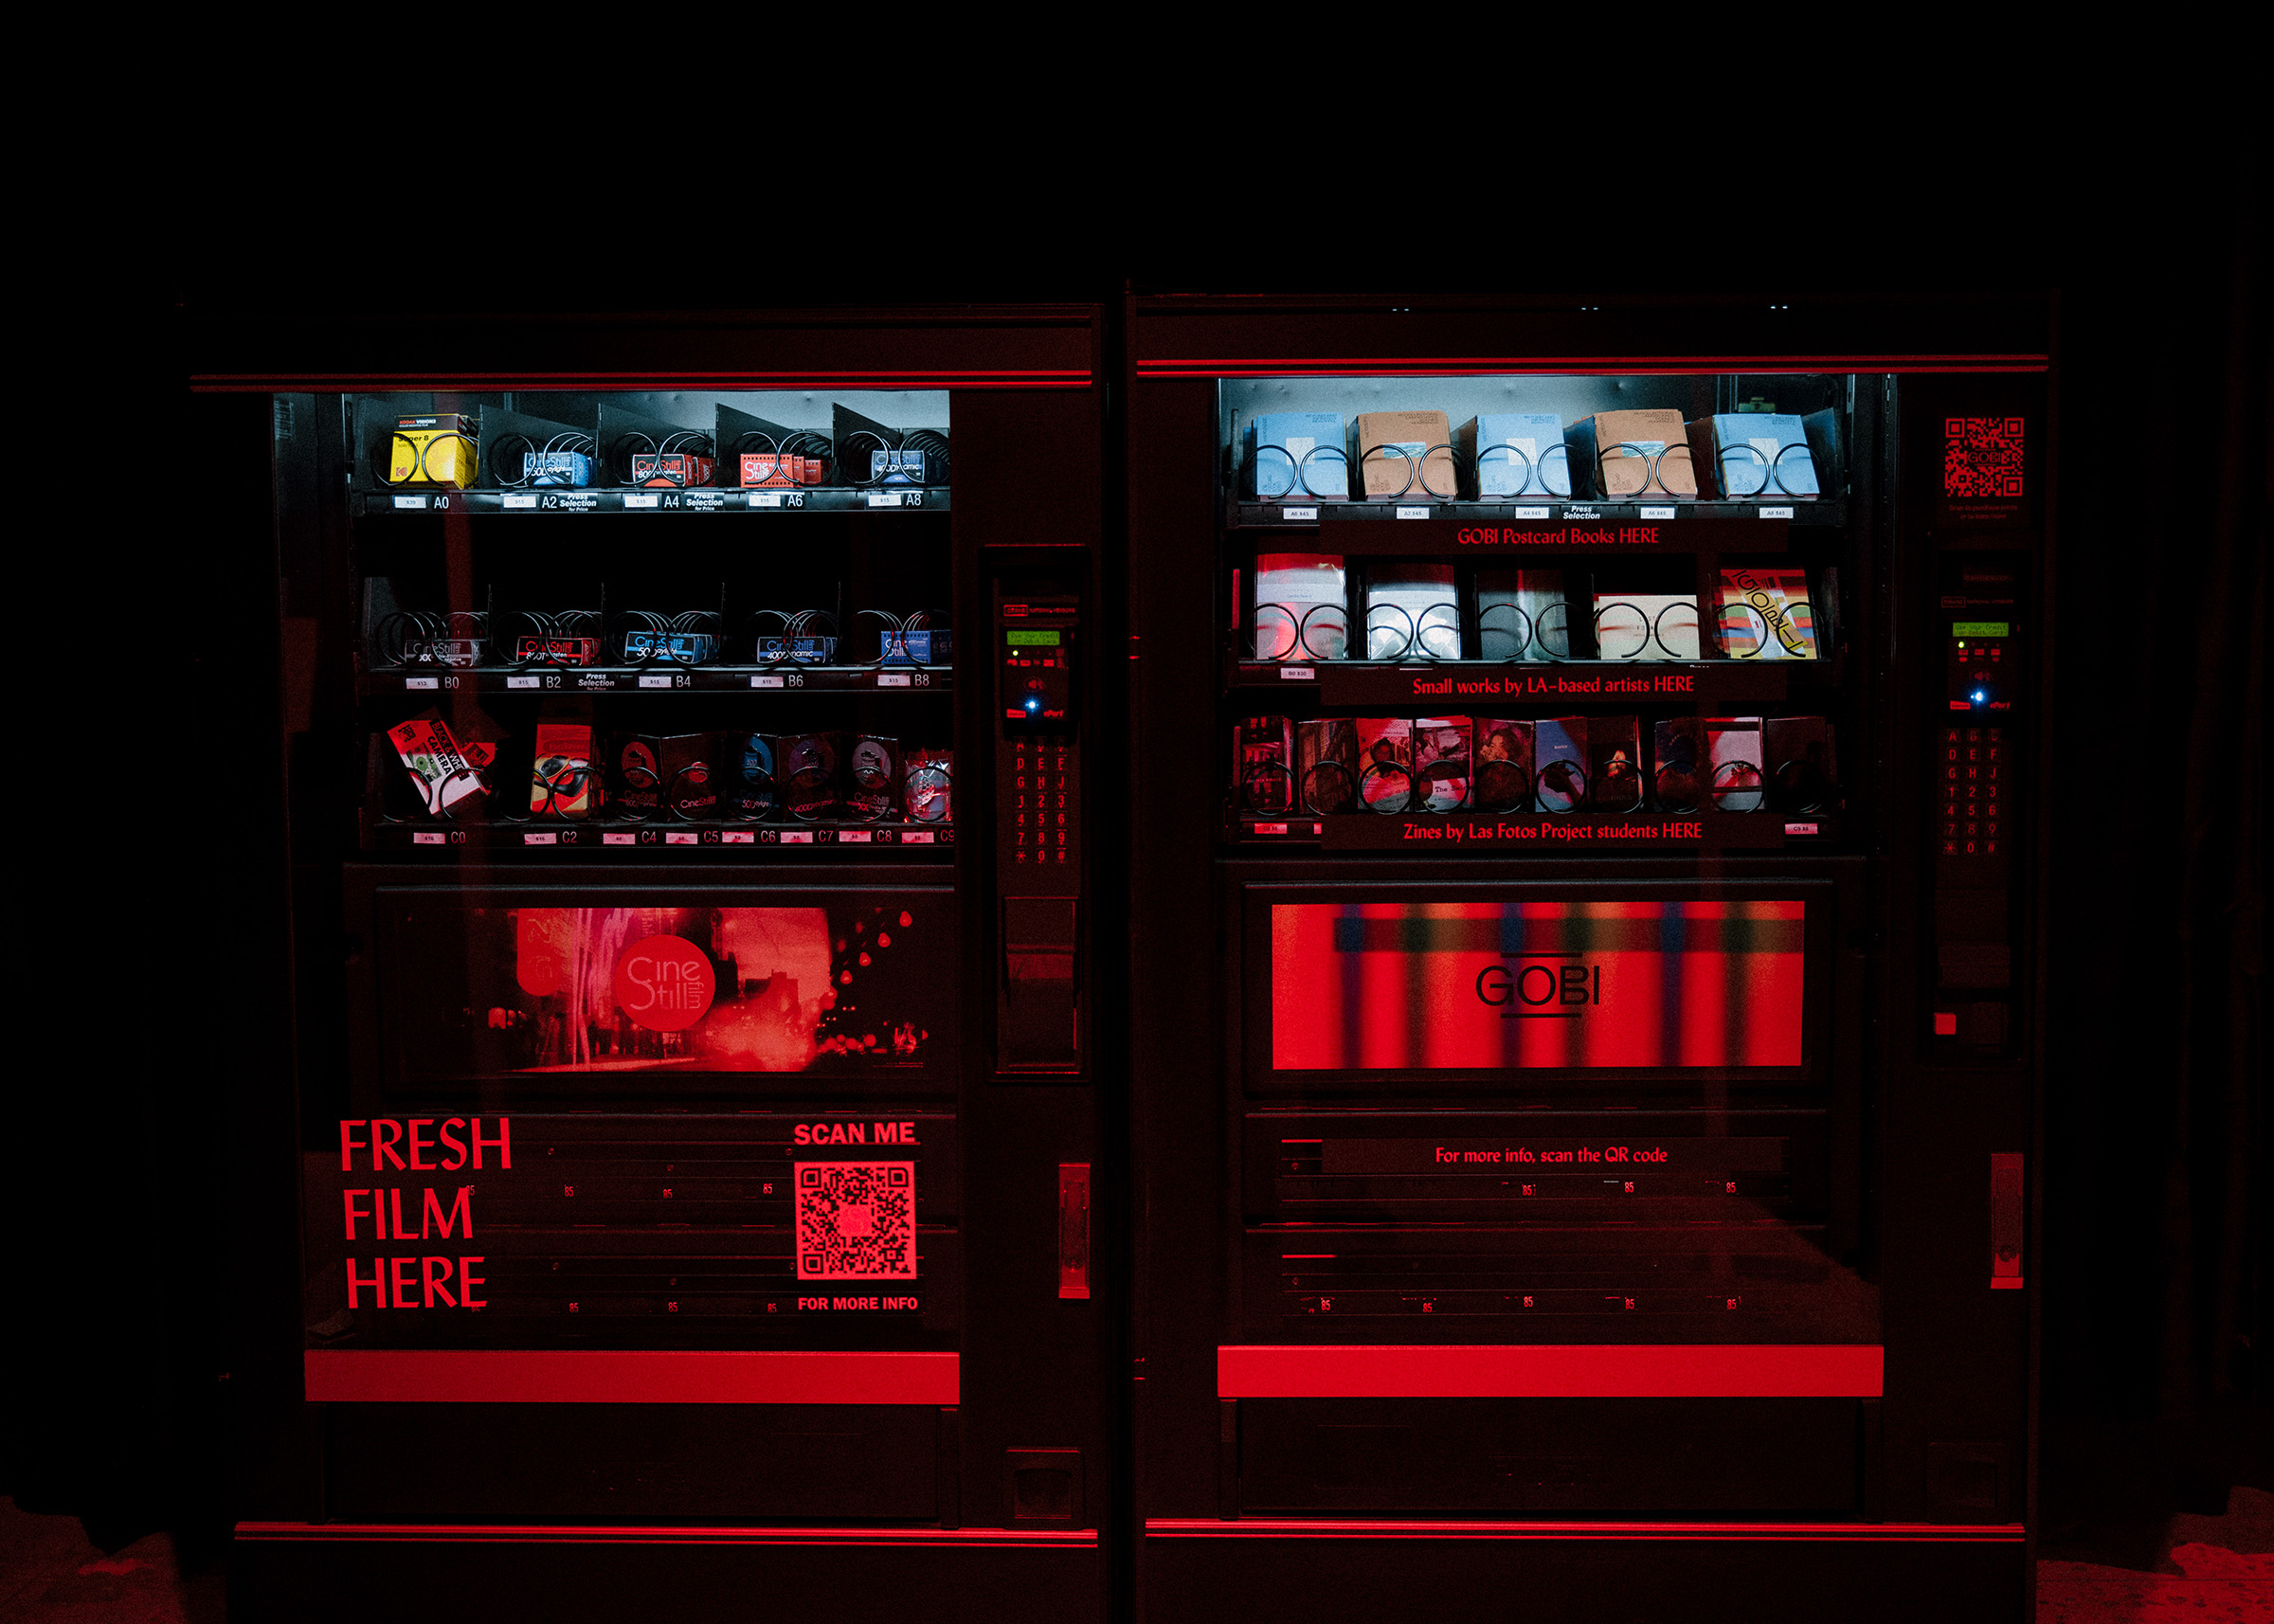 Dark Room by GOBI - two vending machines in the dark room with cameras and films